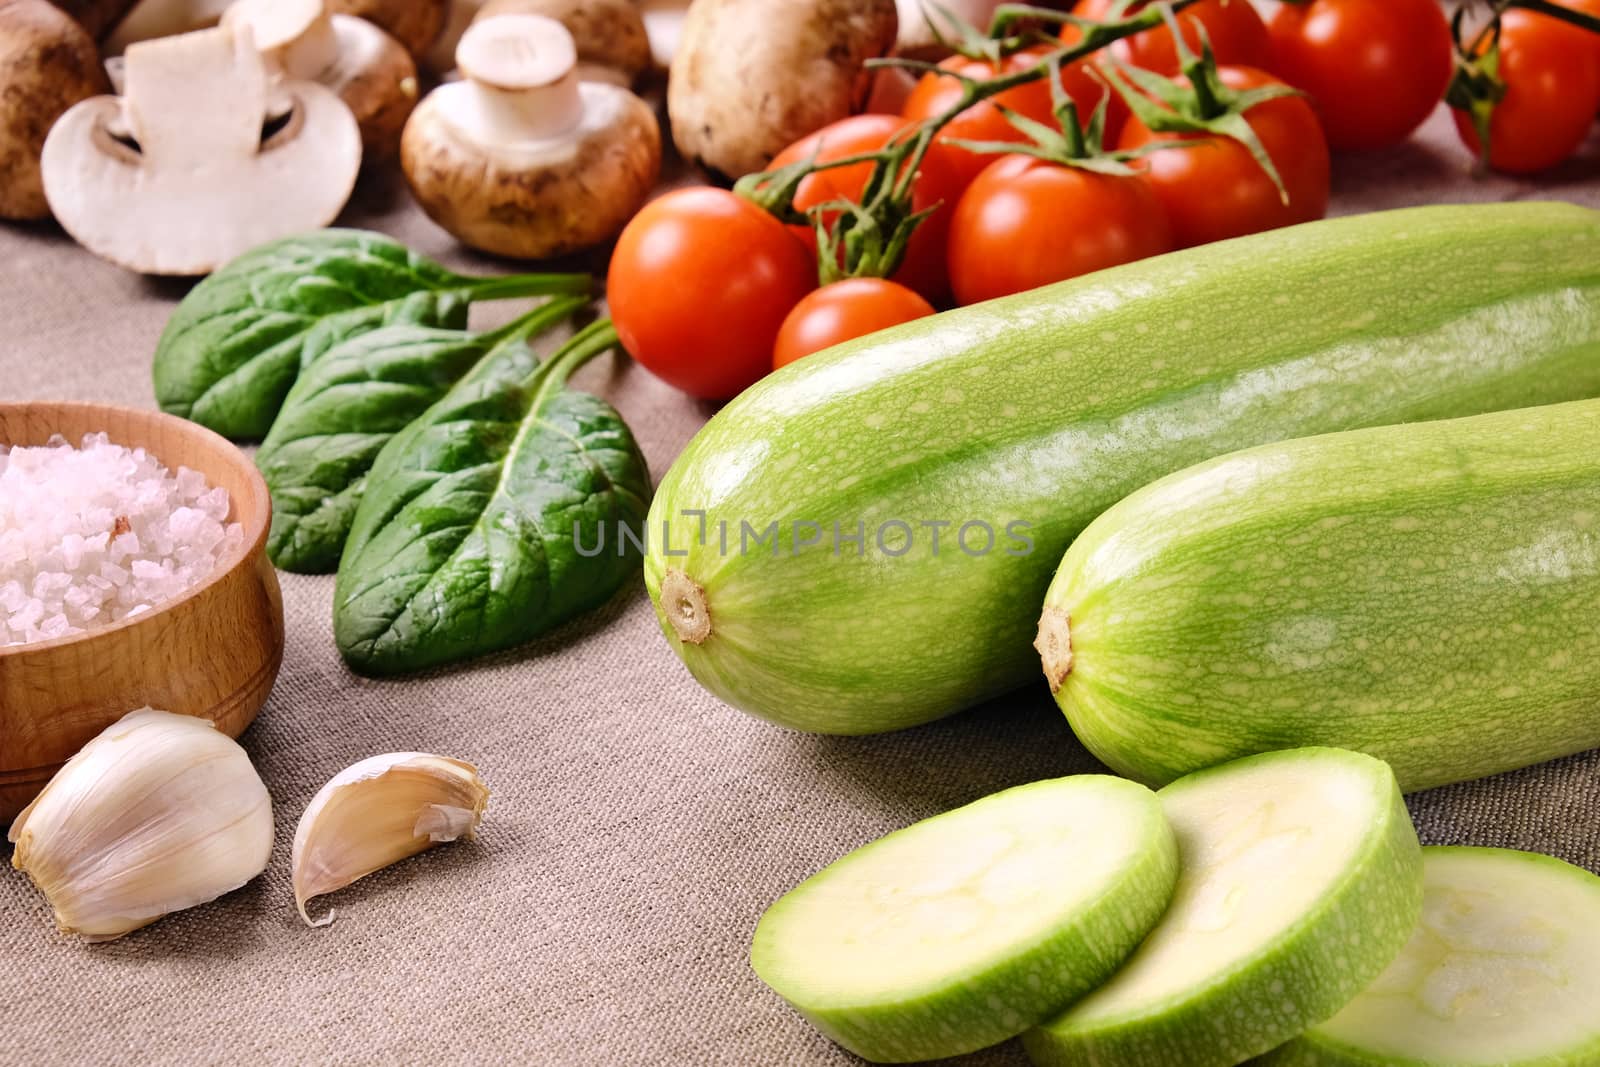 Zucchini and other vegetables by leventina